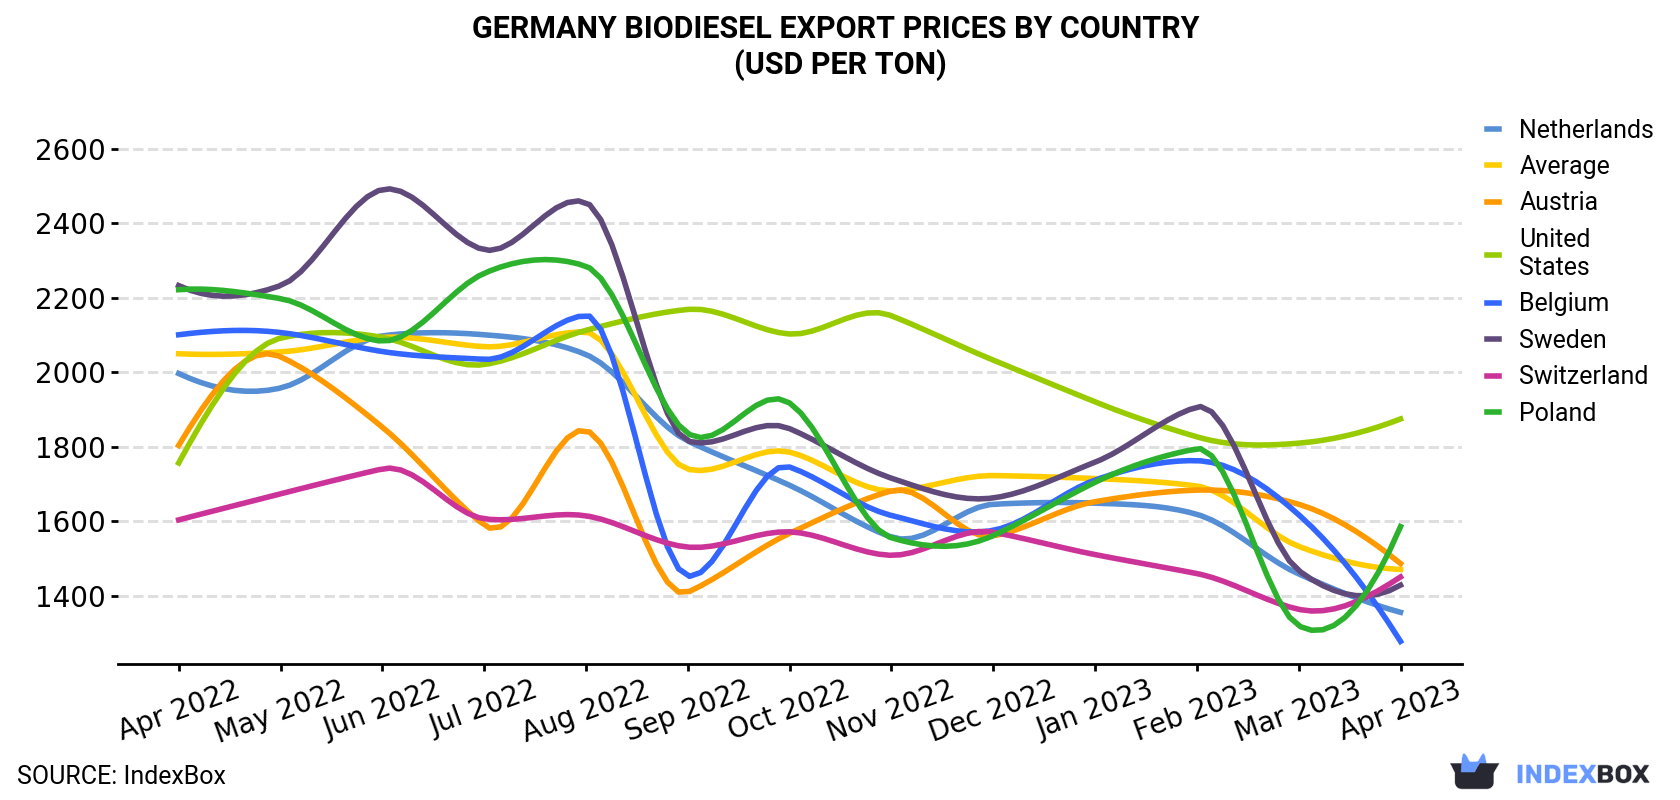 Germany Biodiesel Export Prices By Country (USD Per Ton)